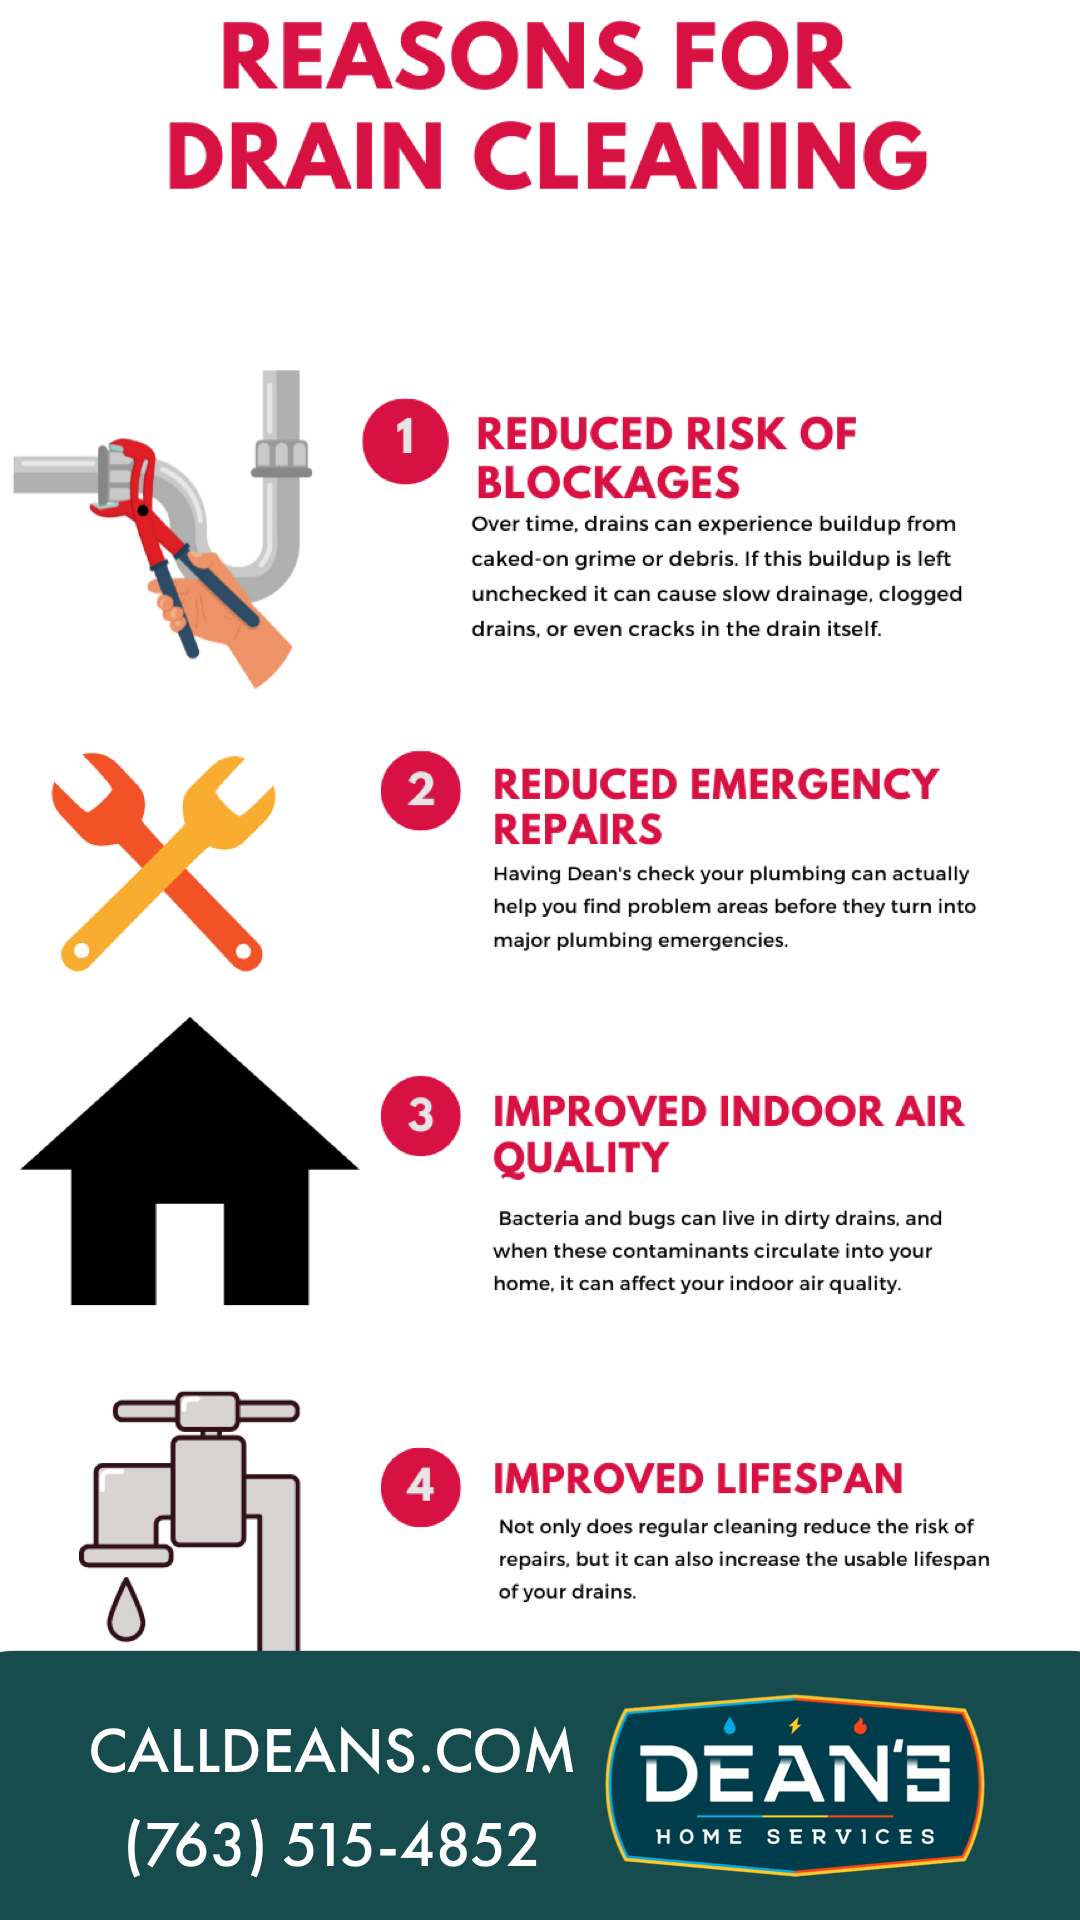 Why Should I Clean My Drains? (Infographic)